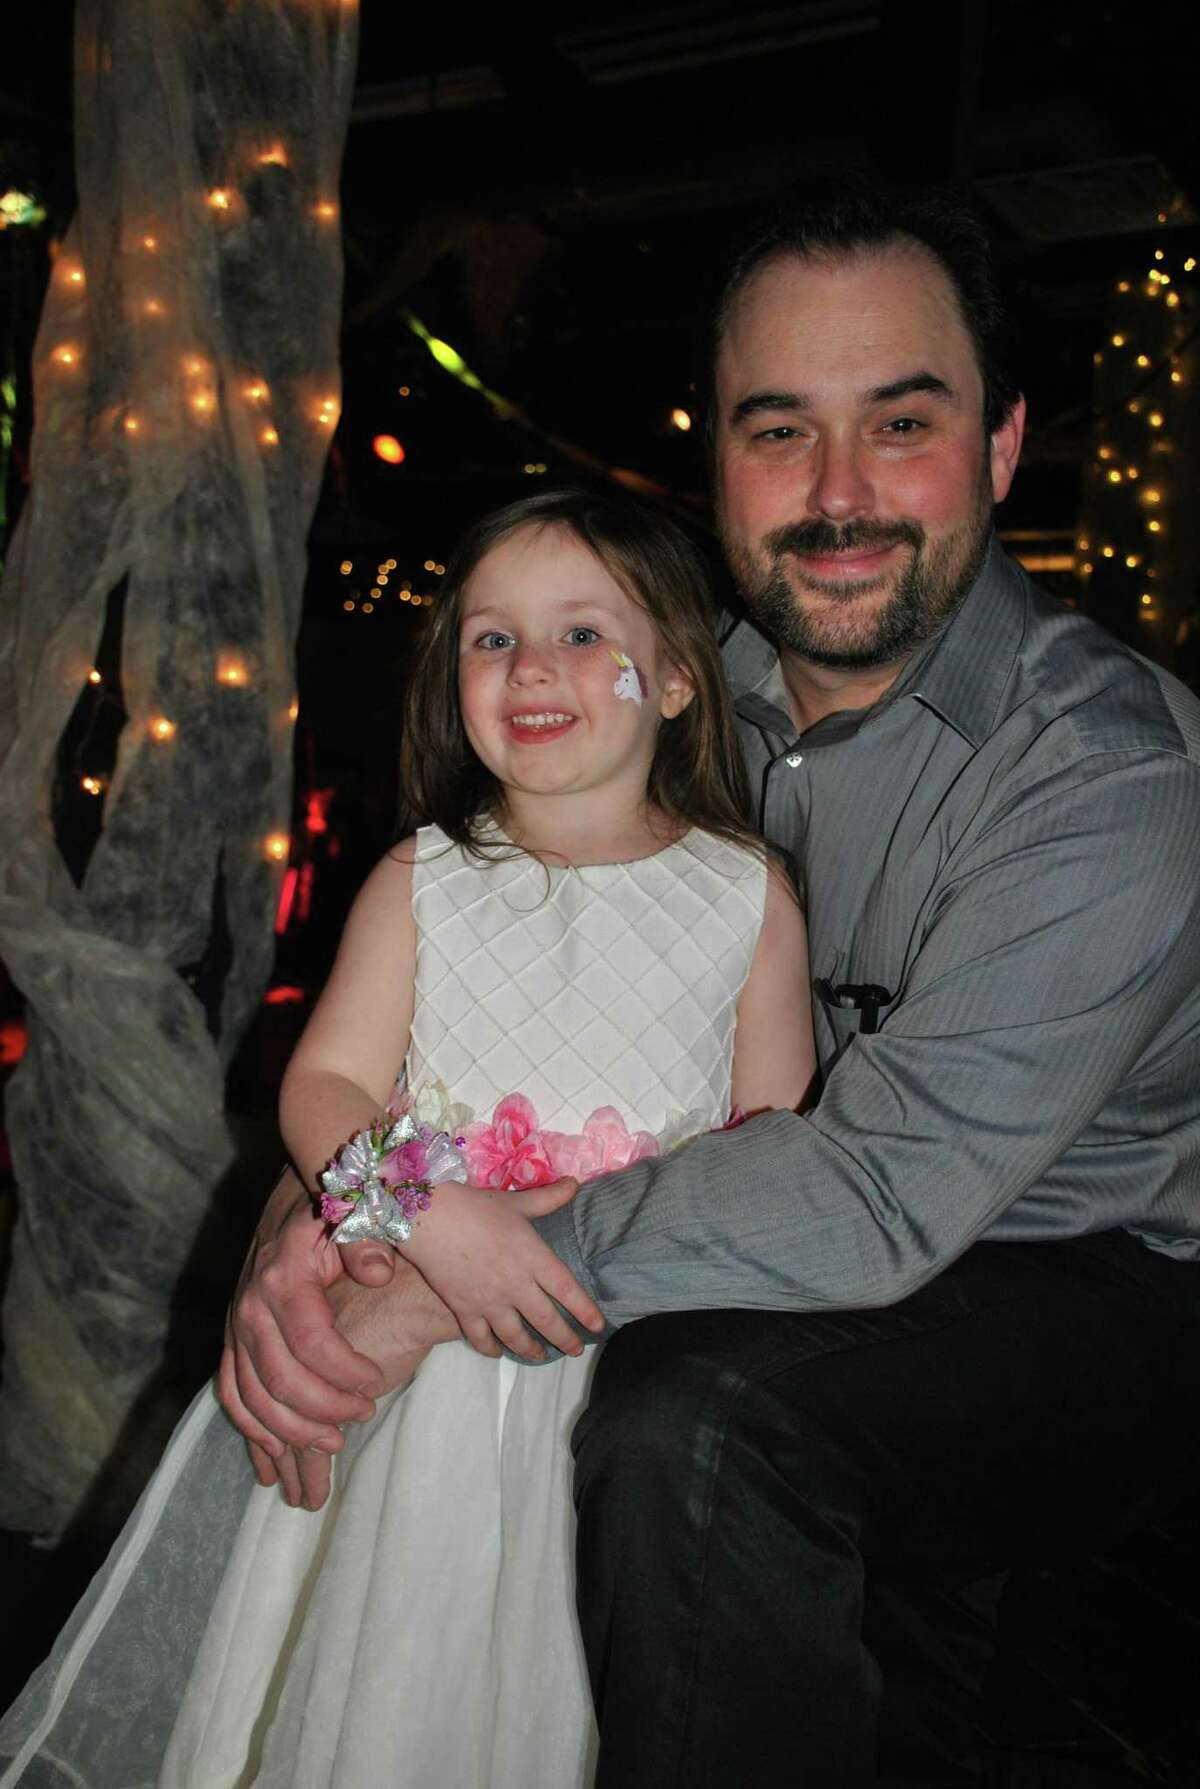 Epoch Arts is holding its annual father-daughter dance April 13, 2019.